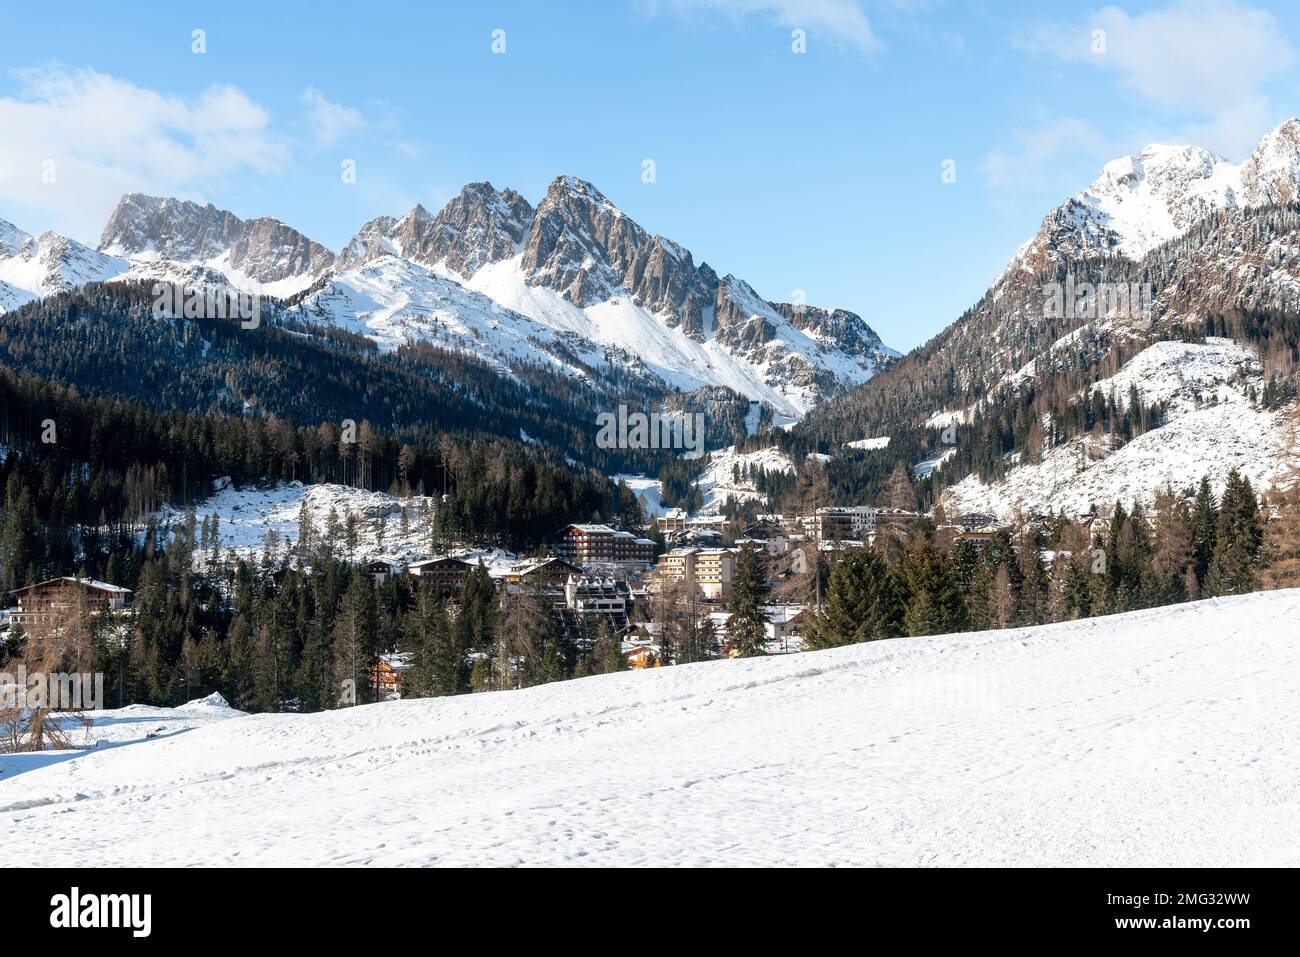 Snowy alpine village surrounded by majestic rocky peaks on a sunny winter day Stock Photo